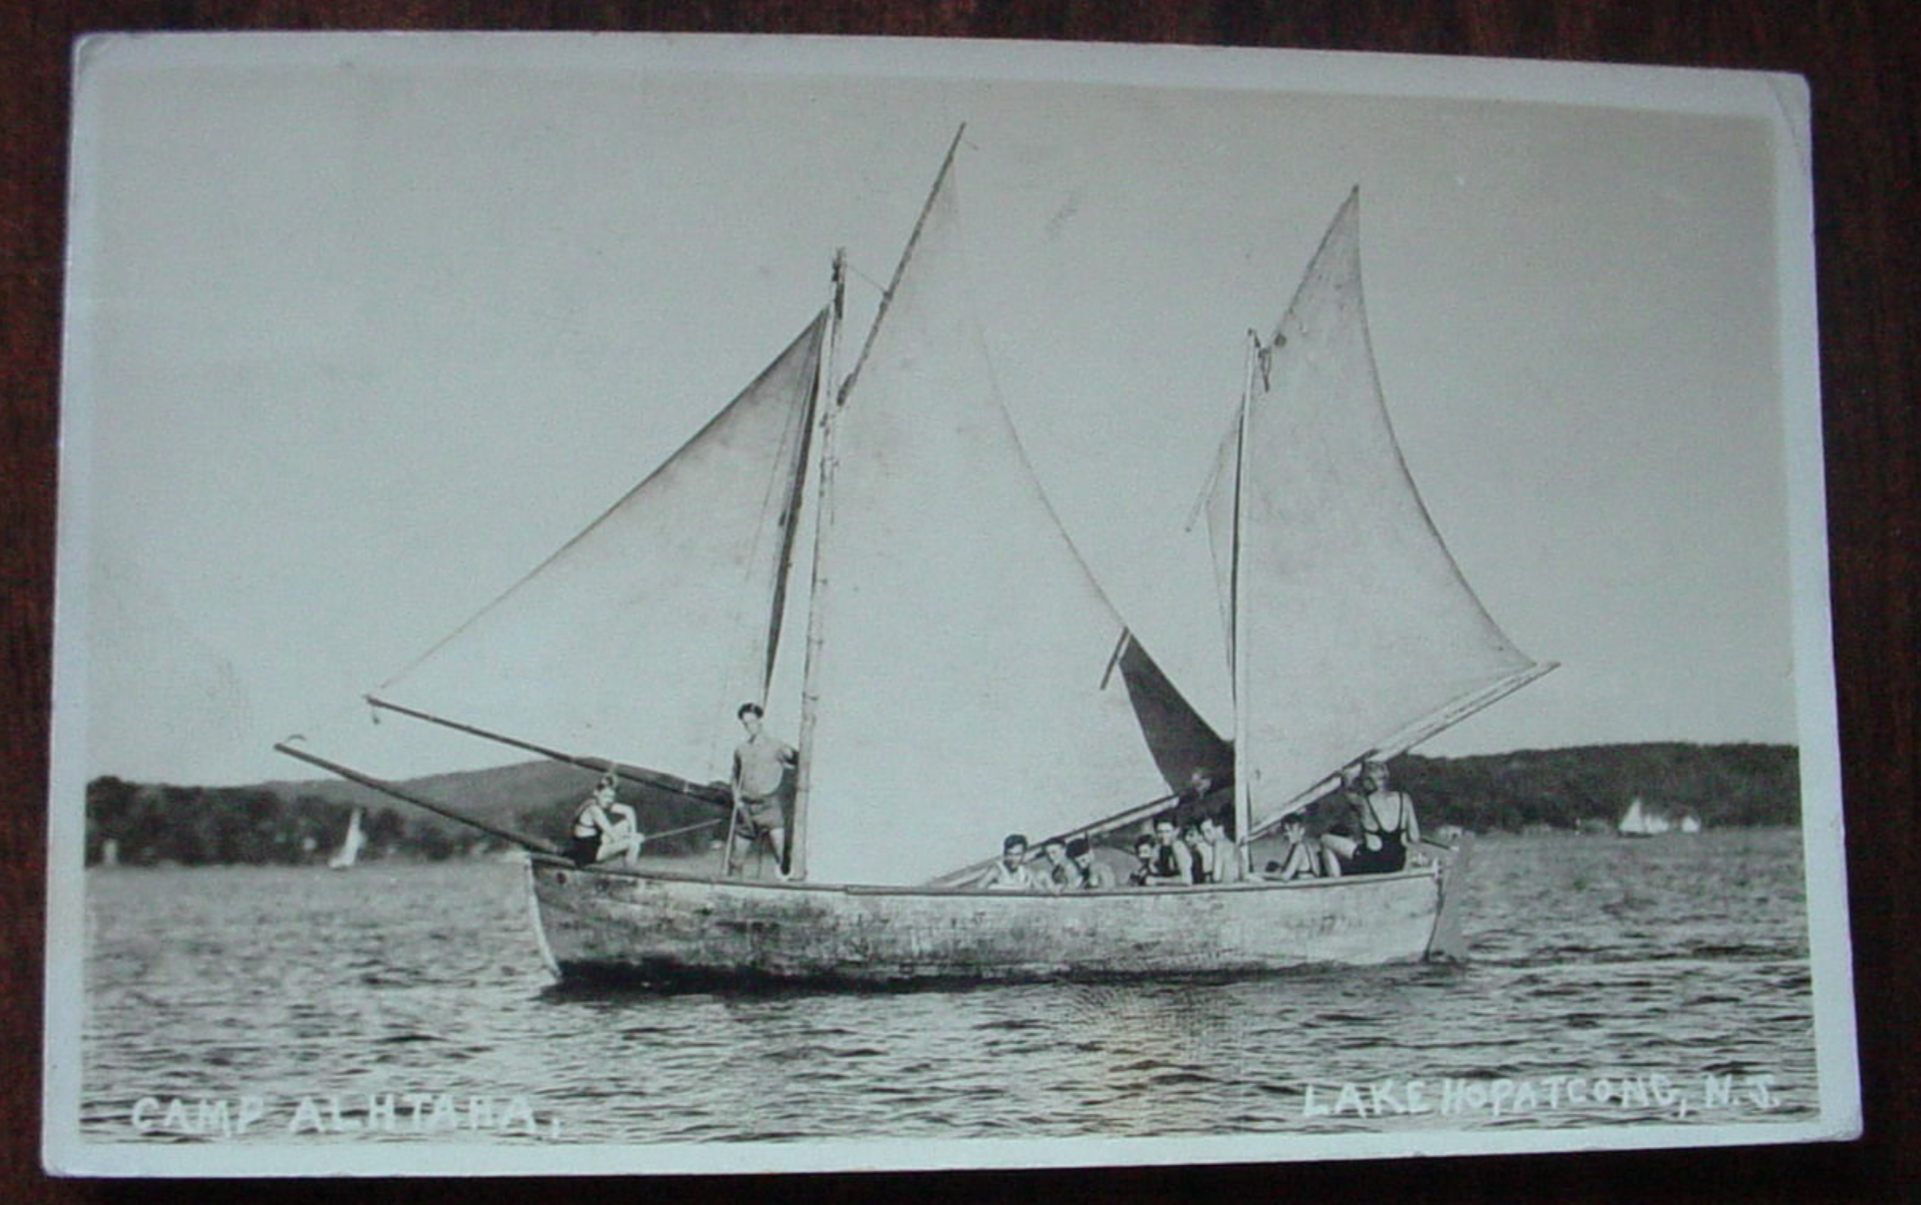 Lake Hopatcong - Sailboat at and or from Camp Alhraha - said to be by Harris - c 1910